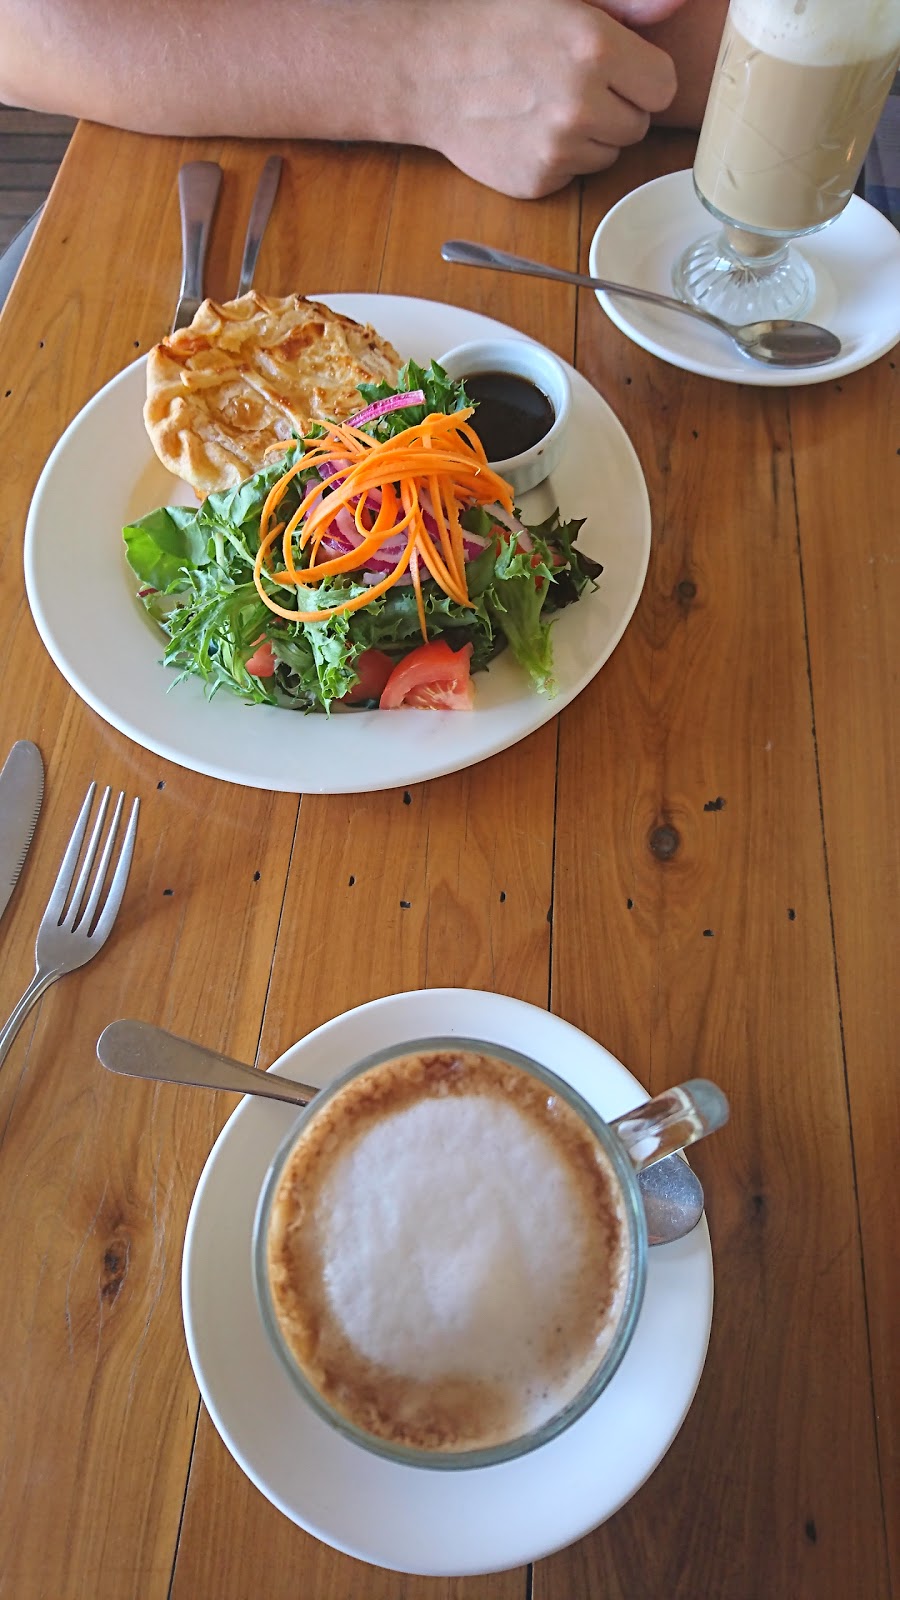 The Old Teahouse | cafe | 208 Bridge St, Muswellbrook NSW 2333, Australia | 0265412158 OR +61 2 6541 2158